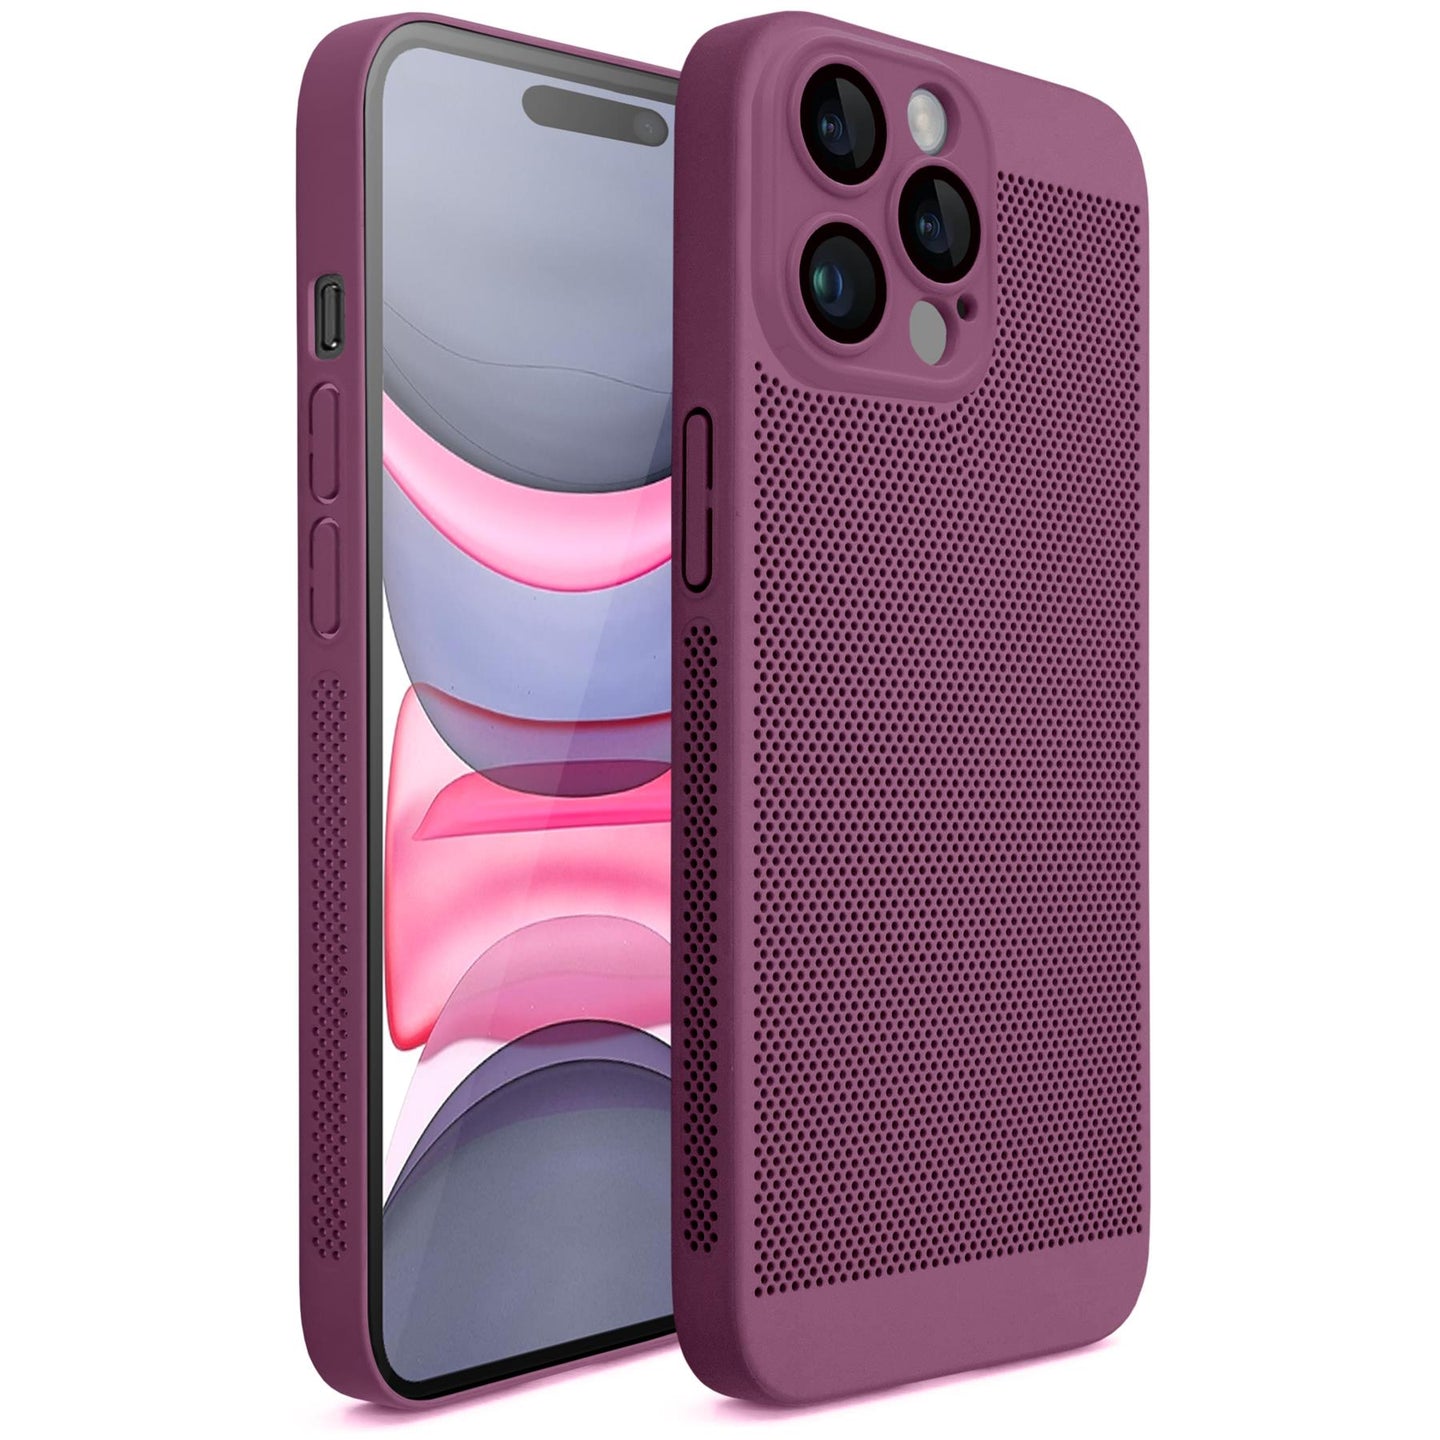 Moozy VentiGuard Phone Case for iphone 14 pro, 6.1-inch, Breathable Cover for iphone 14 pro with Perforated Pattern for Air Circulation, Hard case for iphone 14 pro, Purple